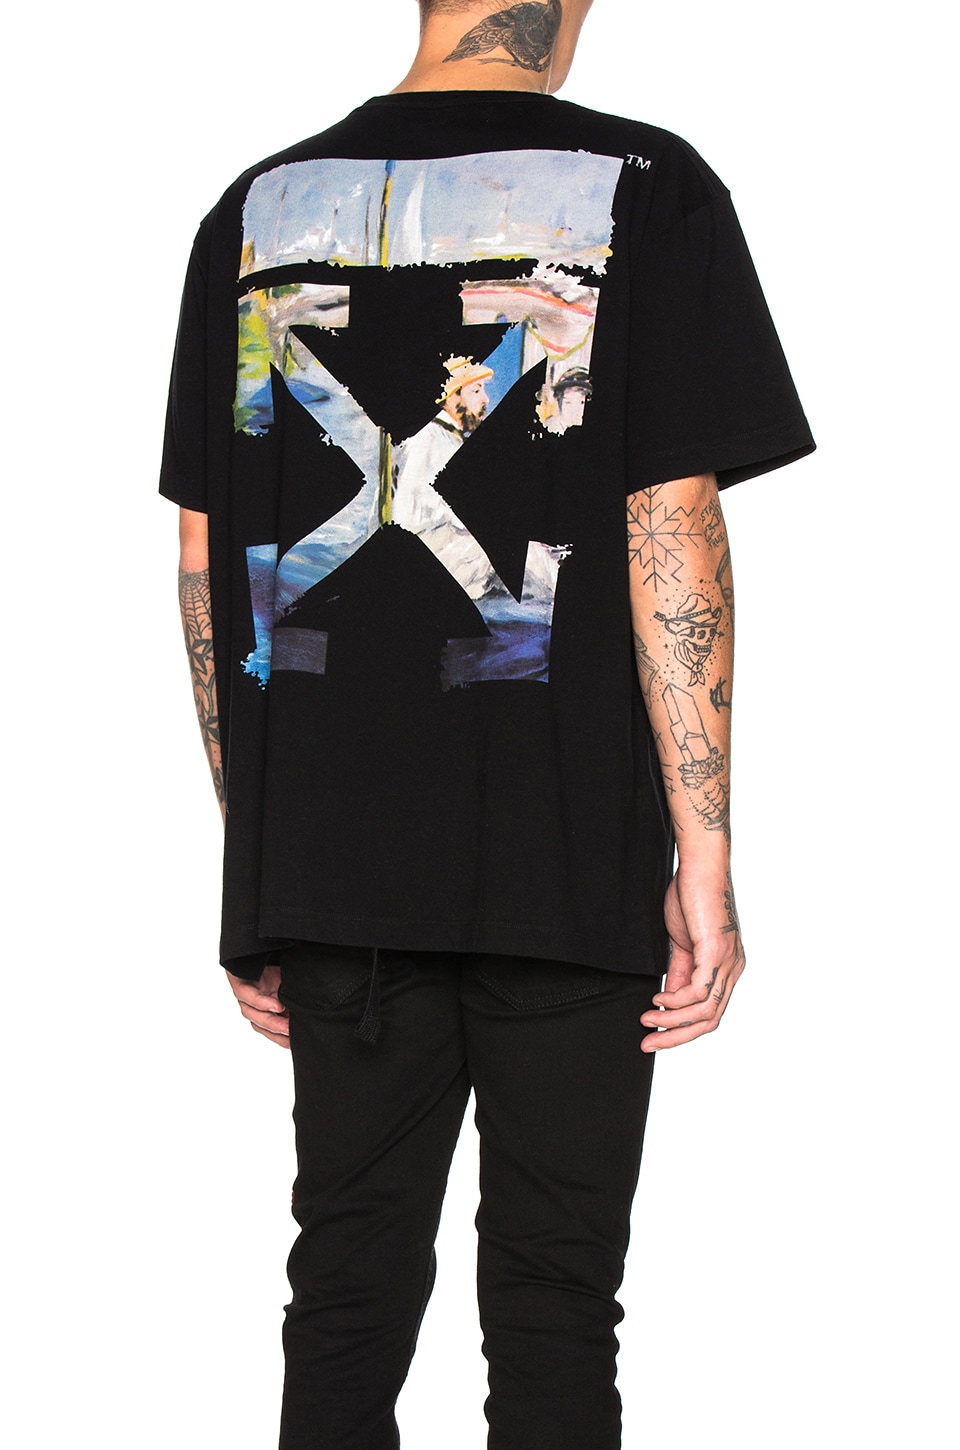 Black Details about   OFF-WHITE "ACRYLIC ARROWS" TEE All Tags & Zip Bag RRP £249 Brand New 